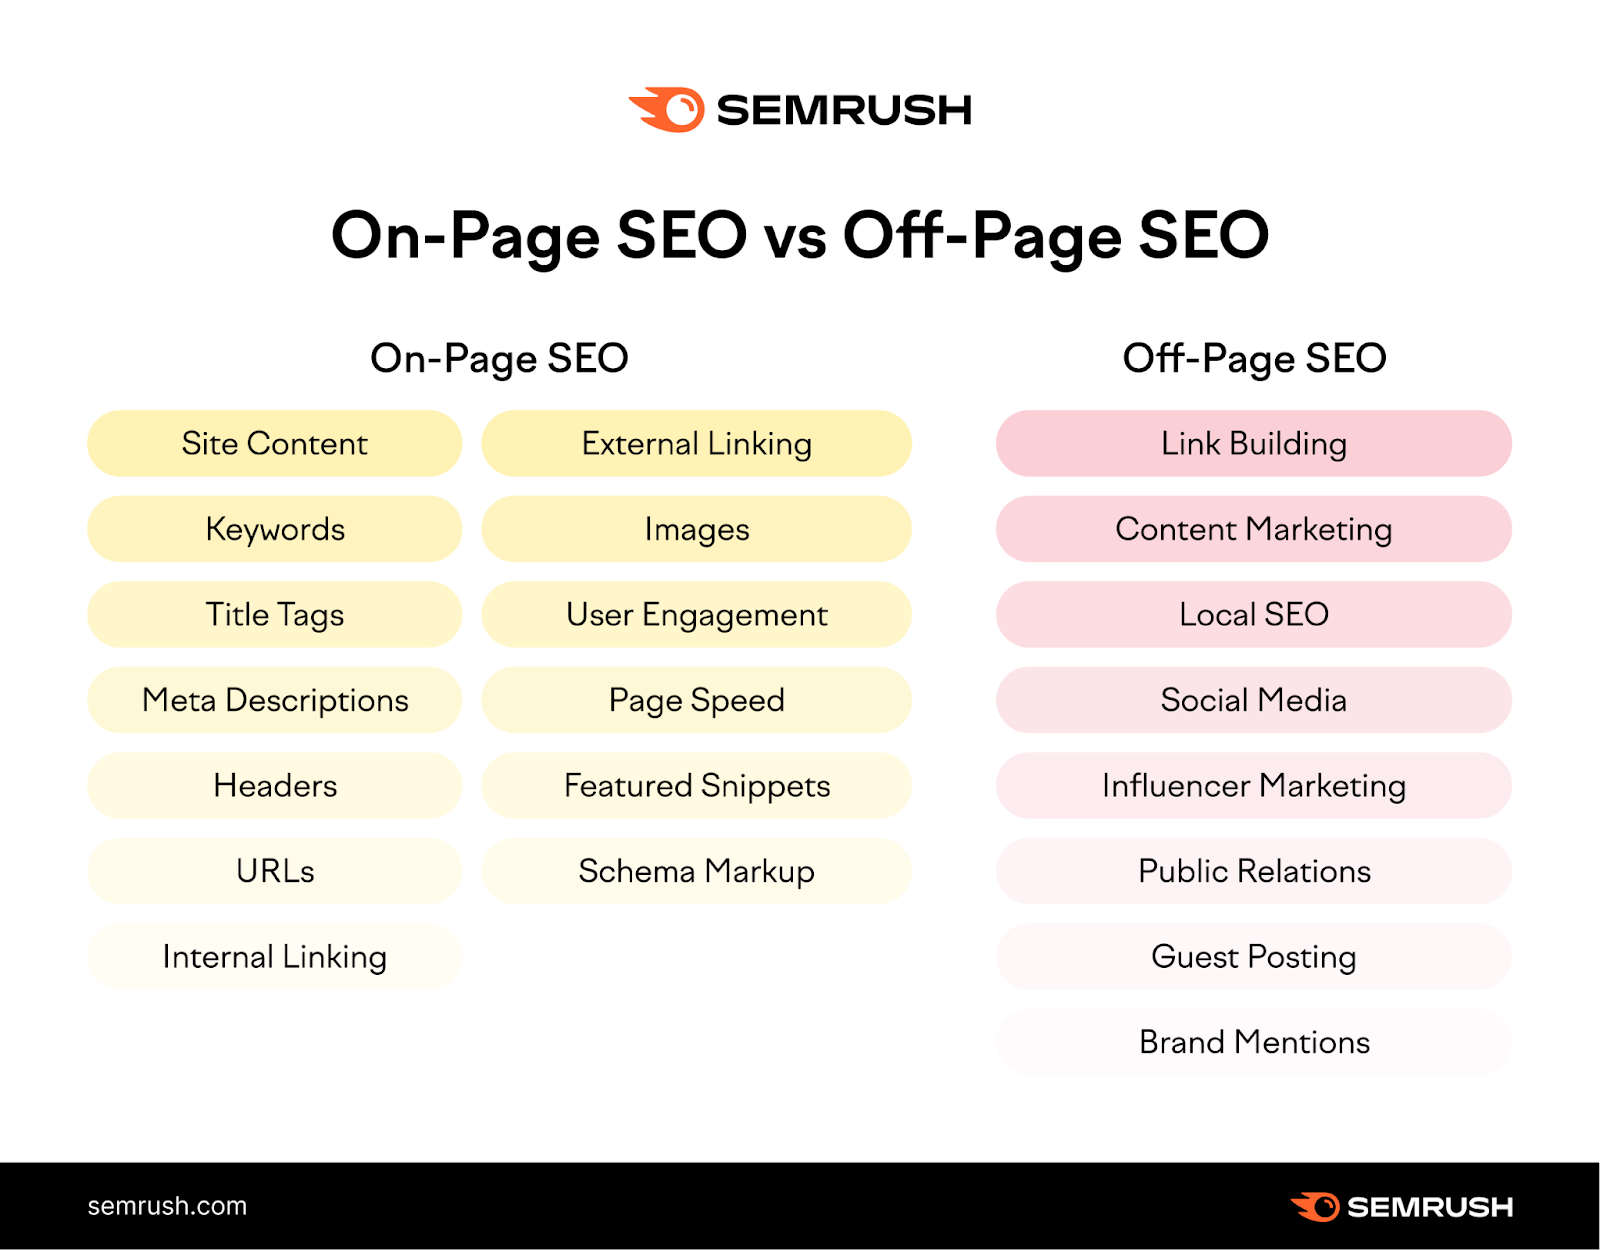 OffPage SEO Checklist Our Top 8 Tips